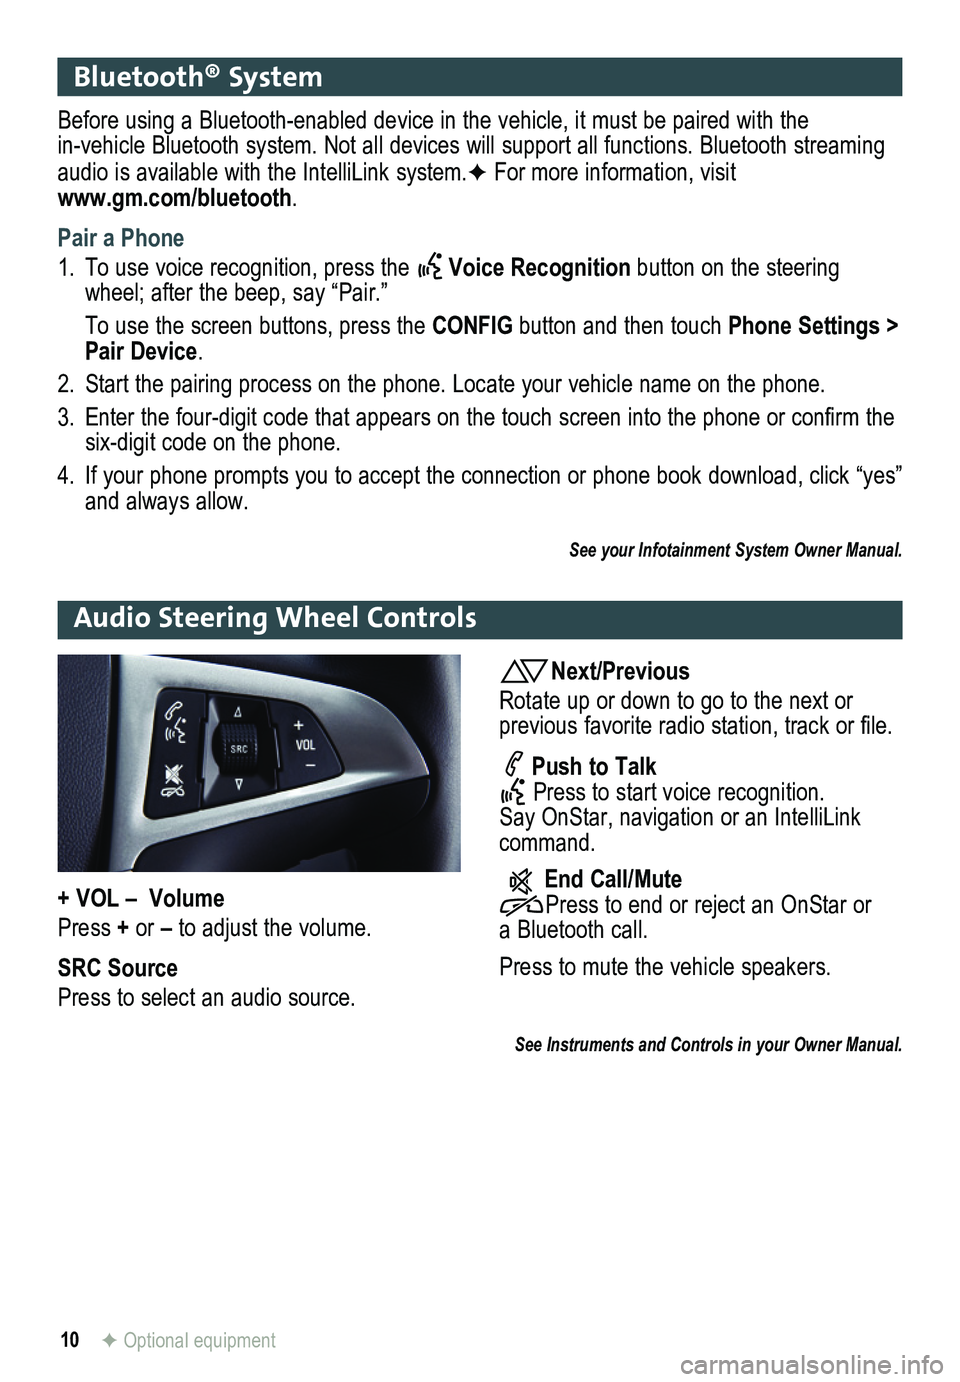 GMC TERRAIN 2013  Get To Know Guide 10F Optional equipment
Bluetooth® System 
Before using a Bluetooth-enabled device in the vehicle, it must be paired with the  in-vehicle Bluetooth system. Not all devices will support all functions. 